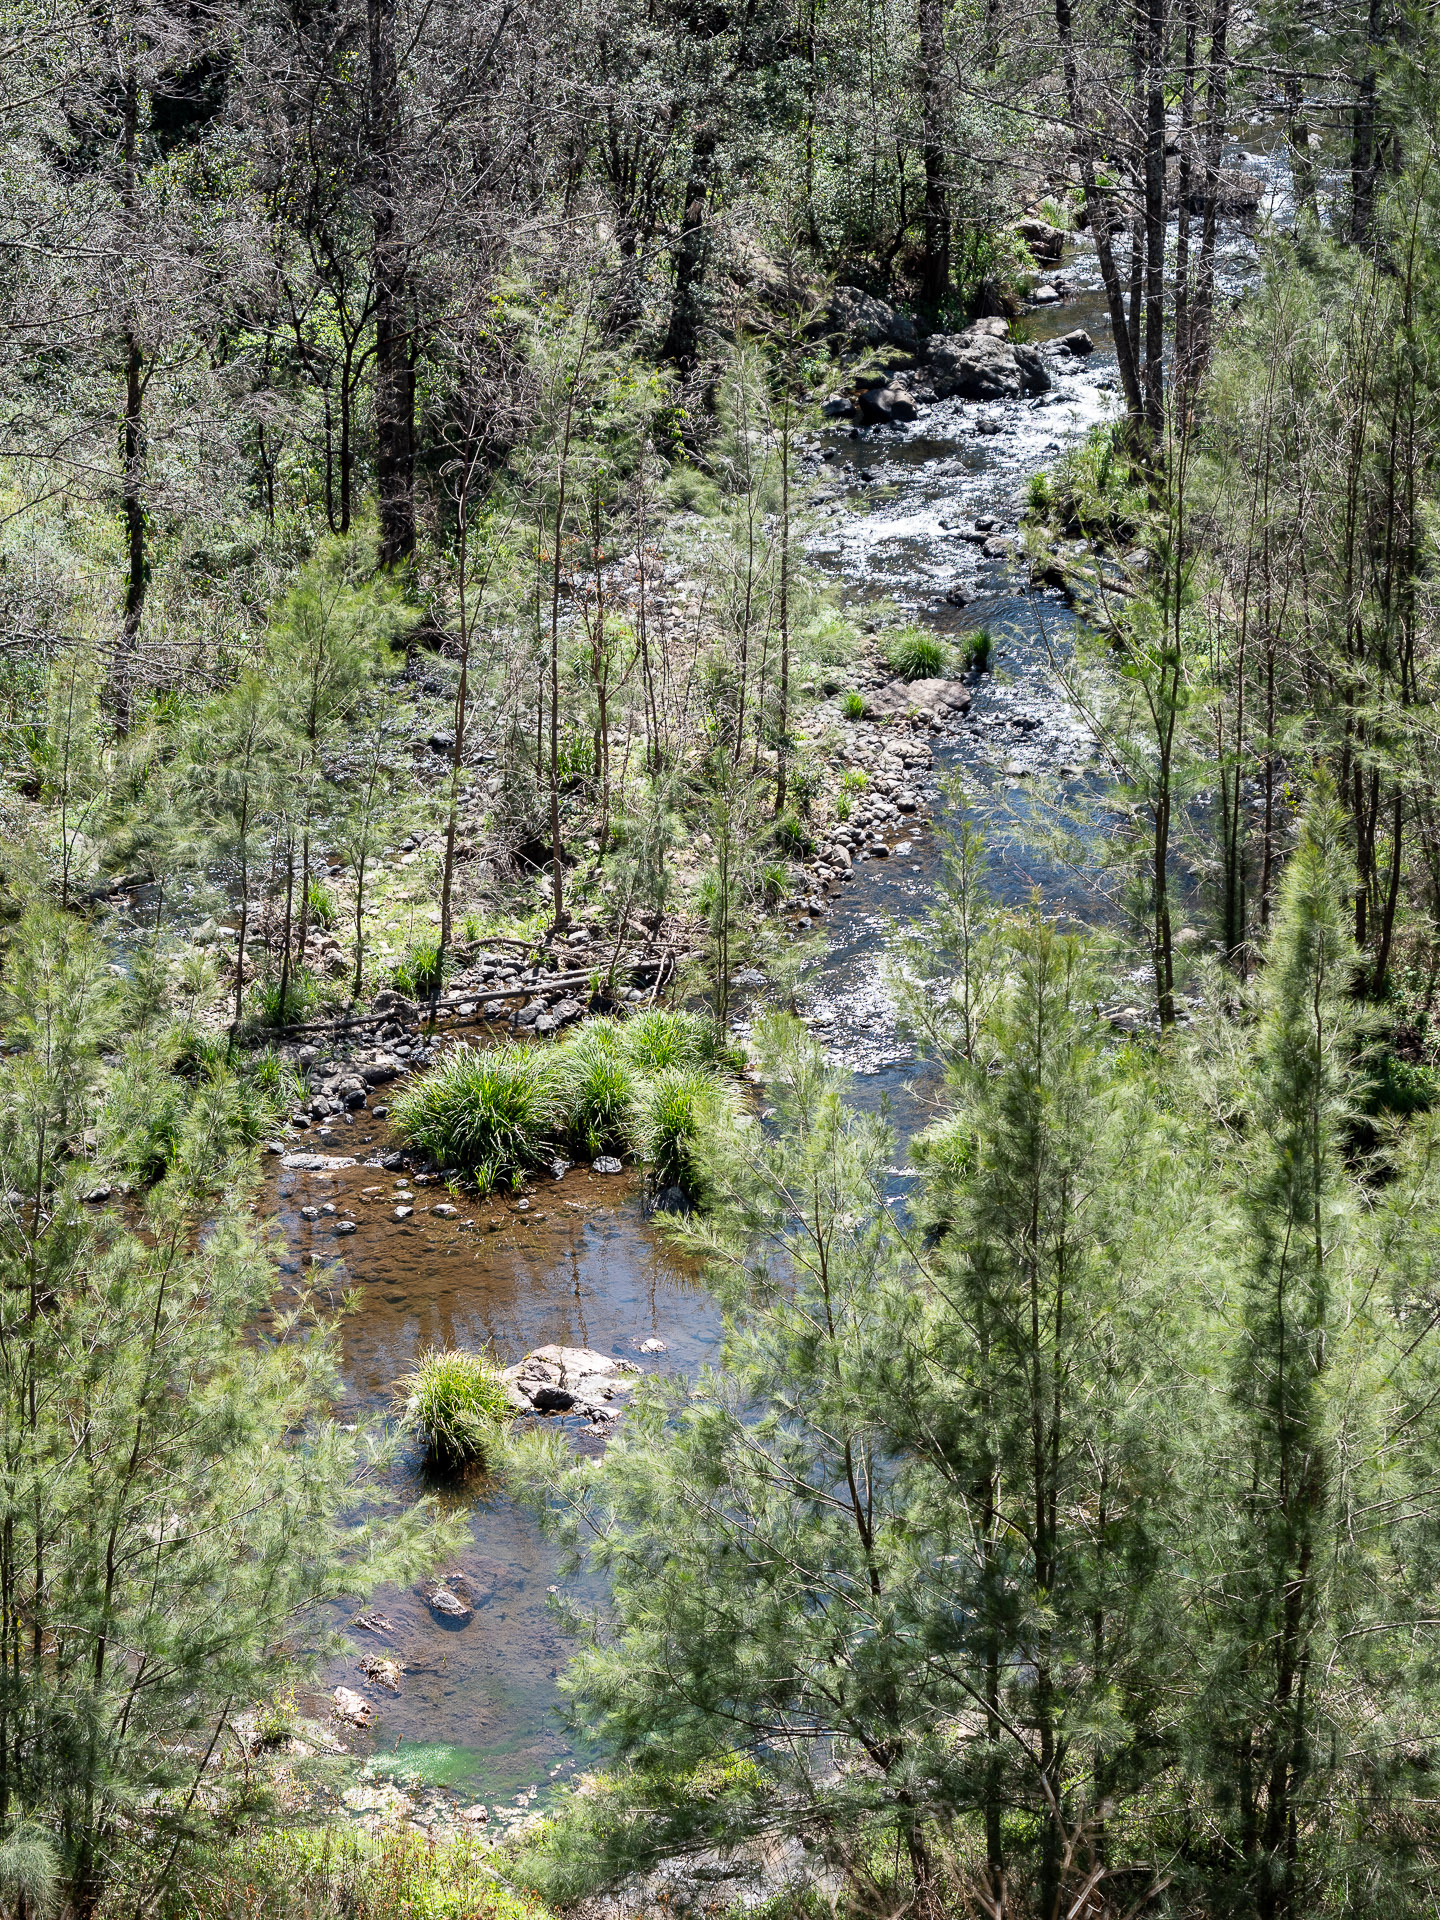 Tuggolo Creek, downstream from this point the weeds started (image G. Luscombe)